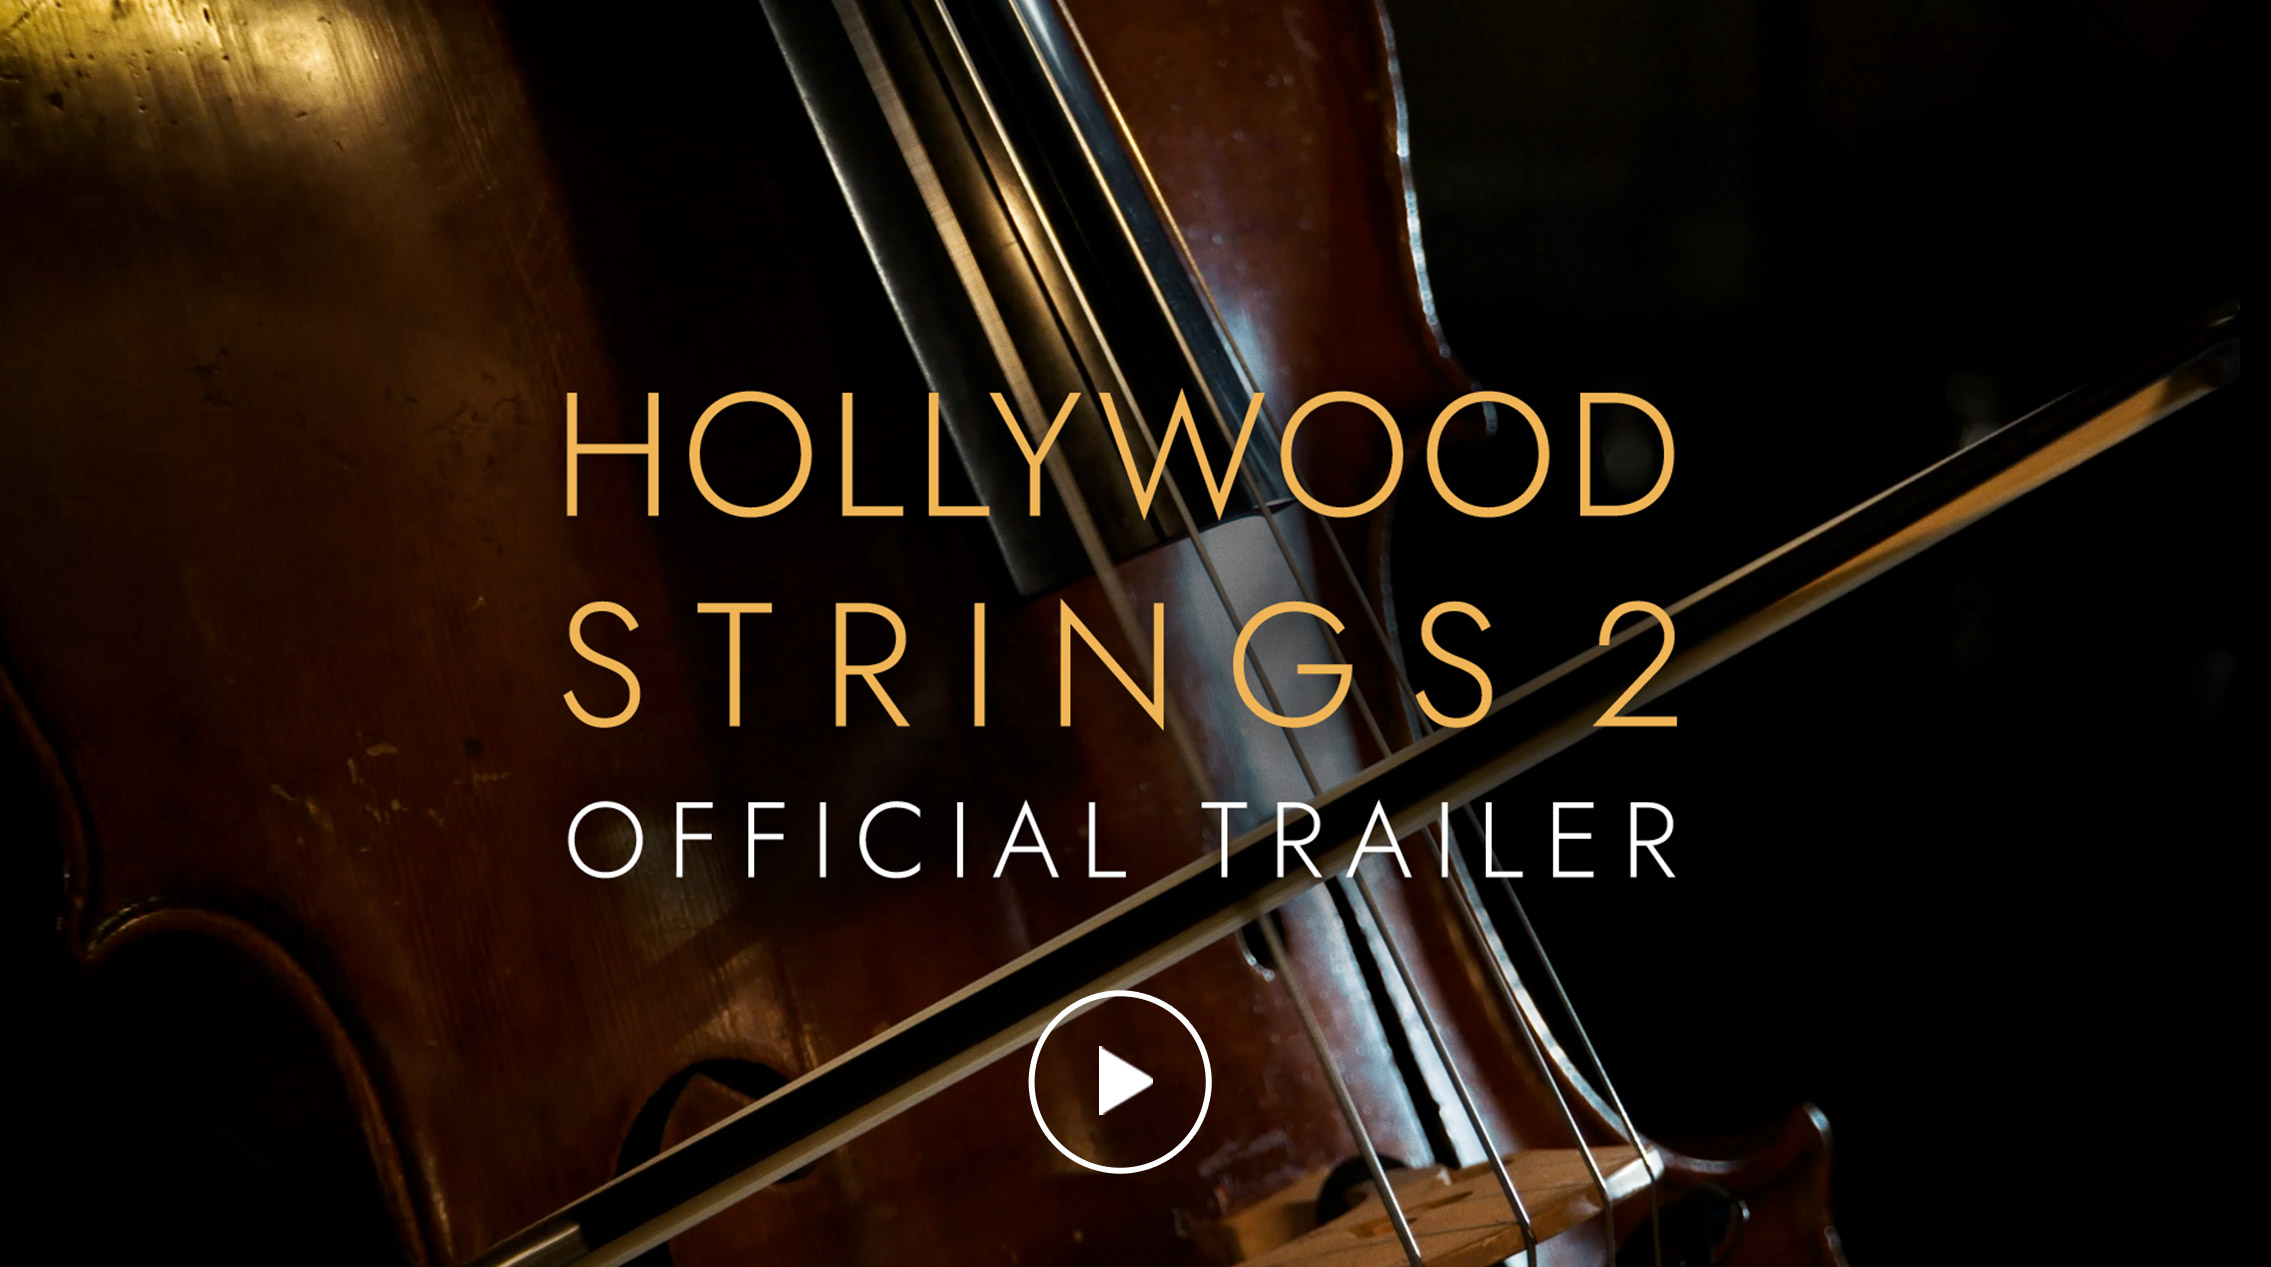 Watch the Hollywood Strings 2 Trailer